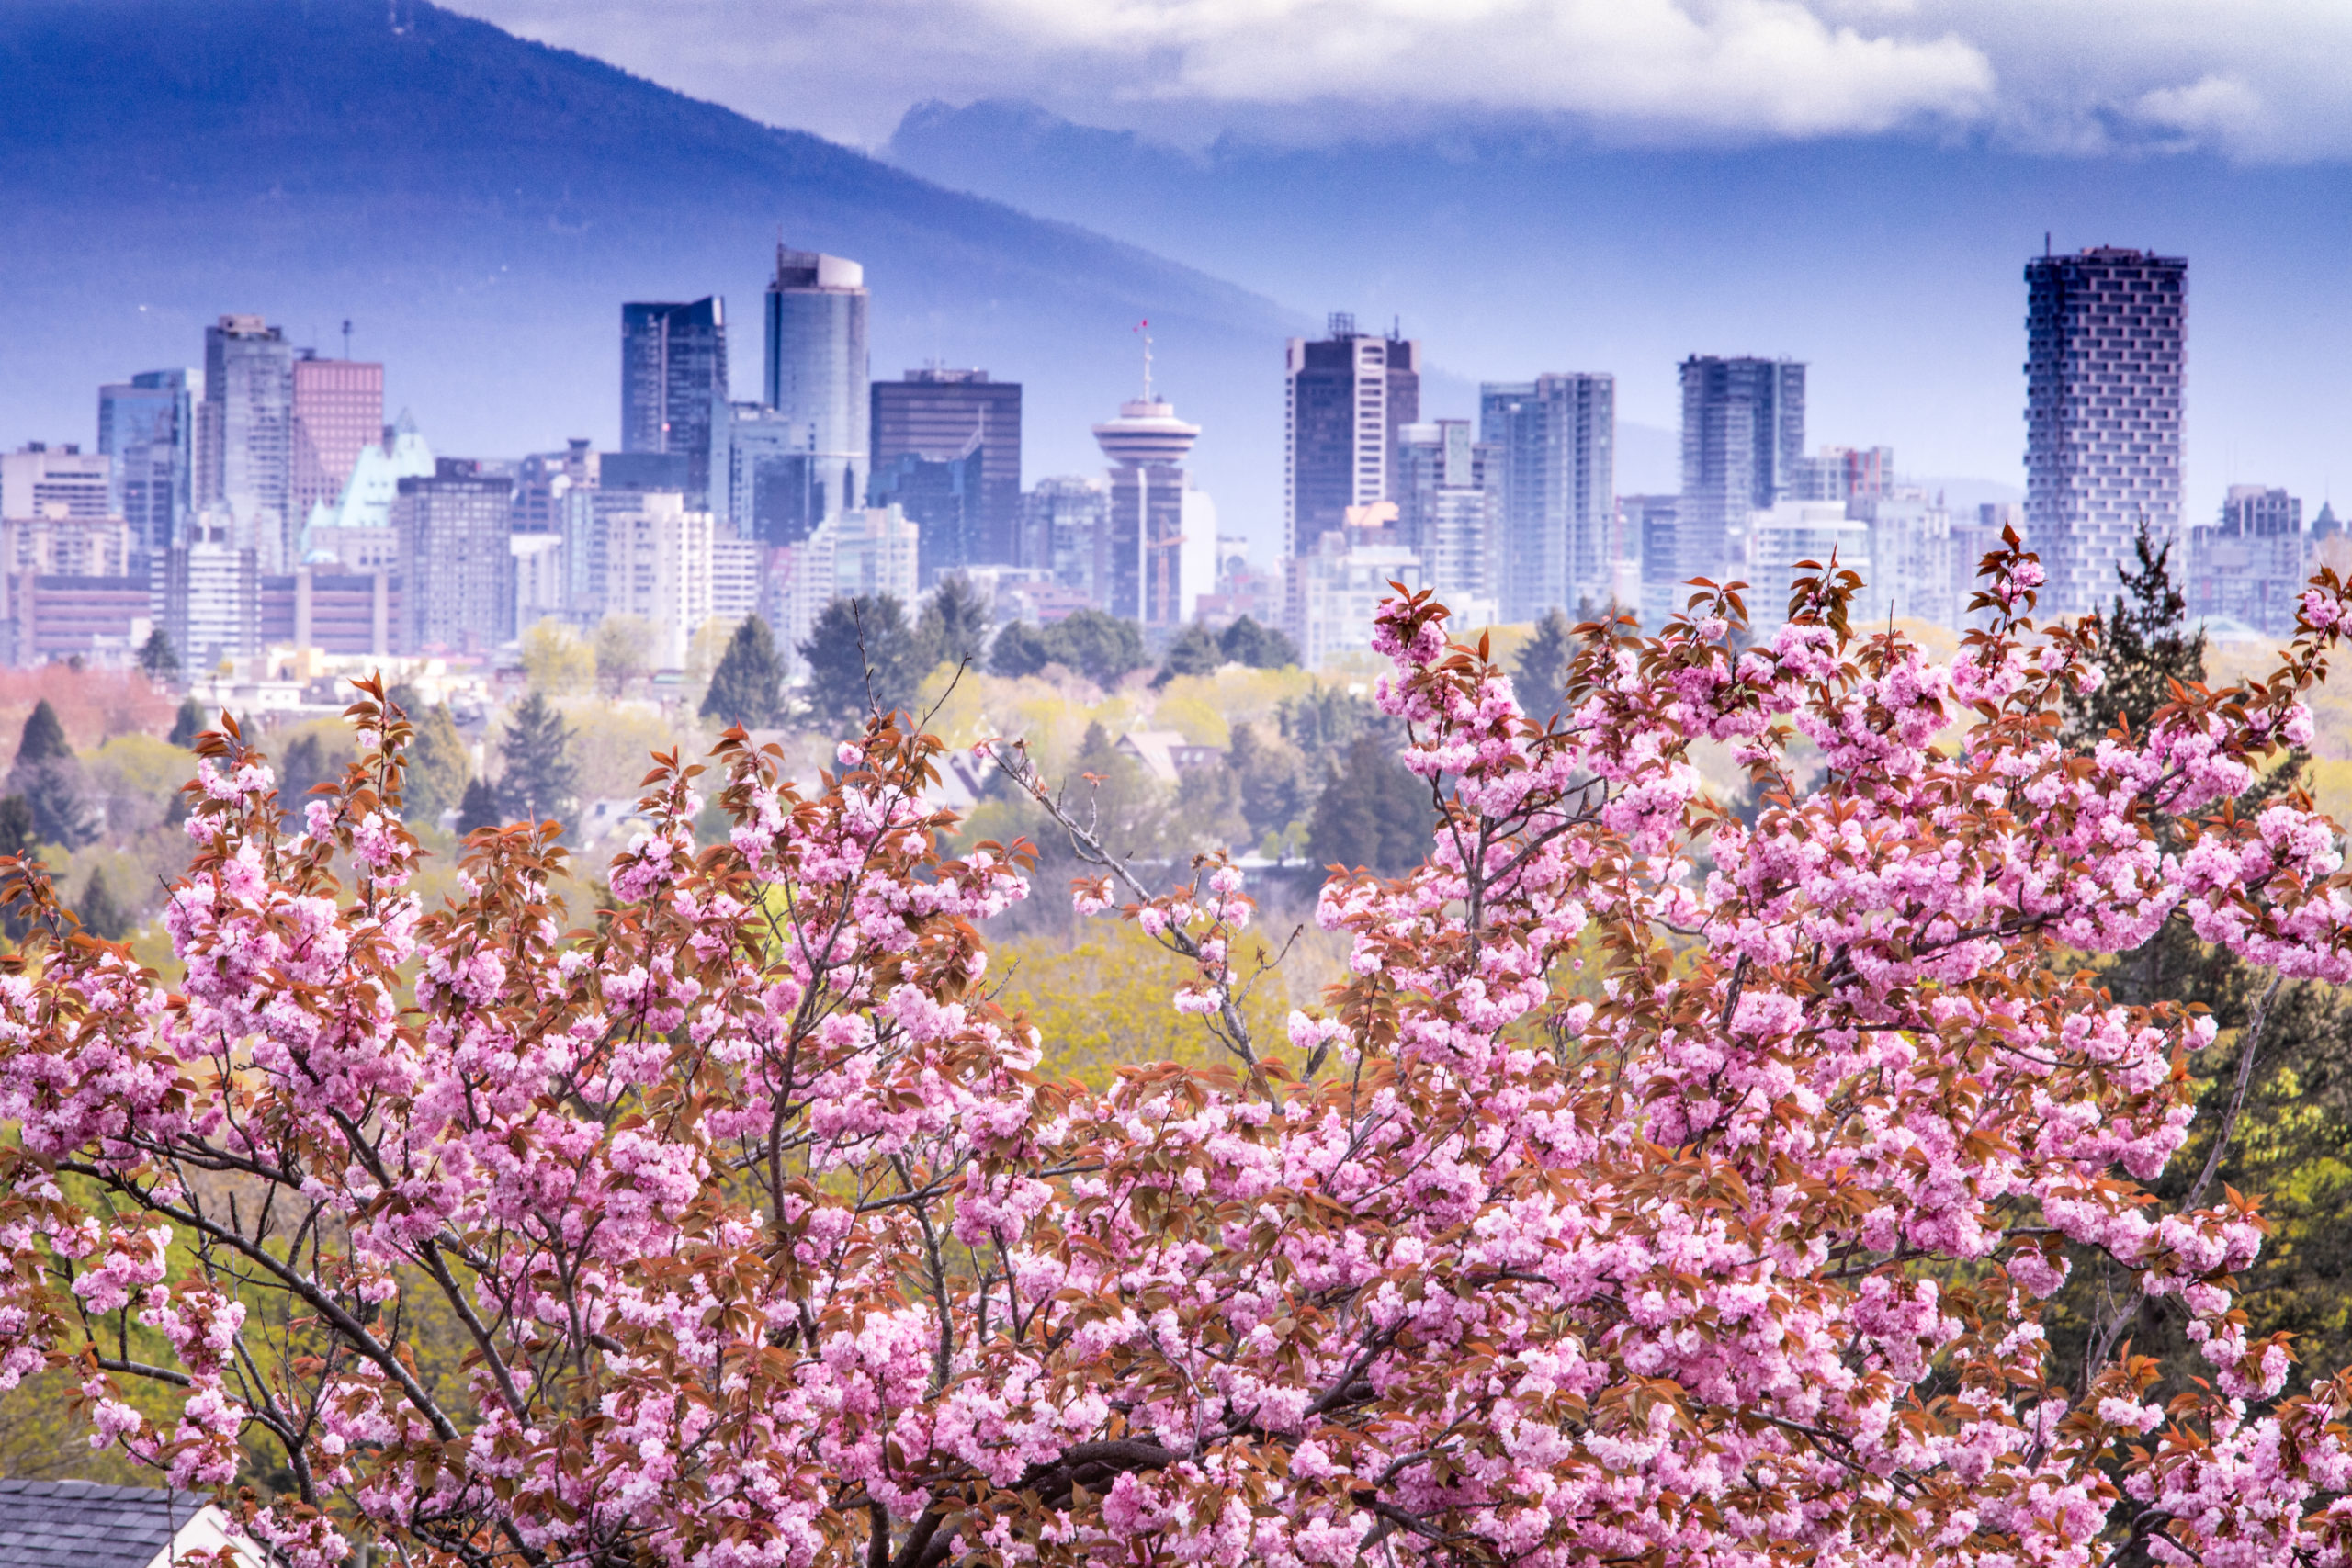 insidevancouver.ca,photo essays,blooms,blossom,cherry blossoms,nature,outsi...